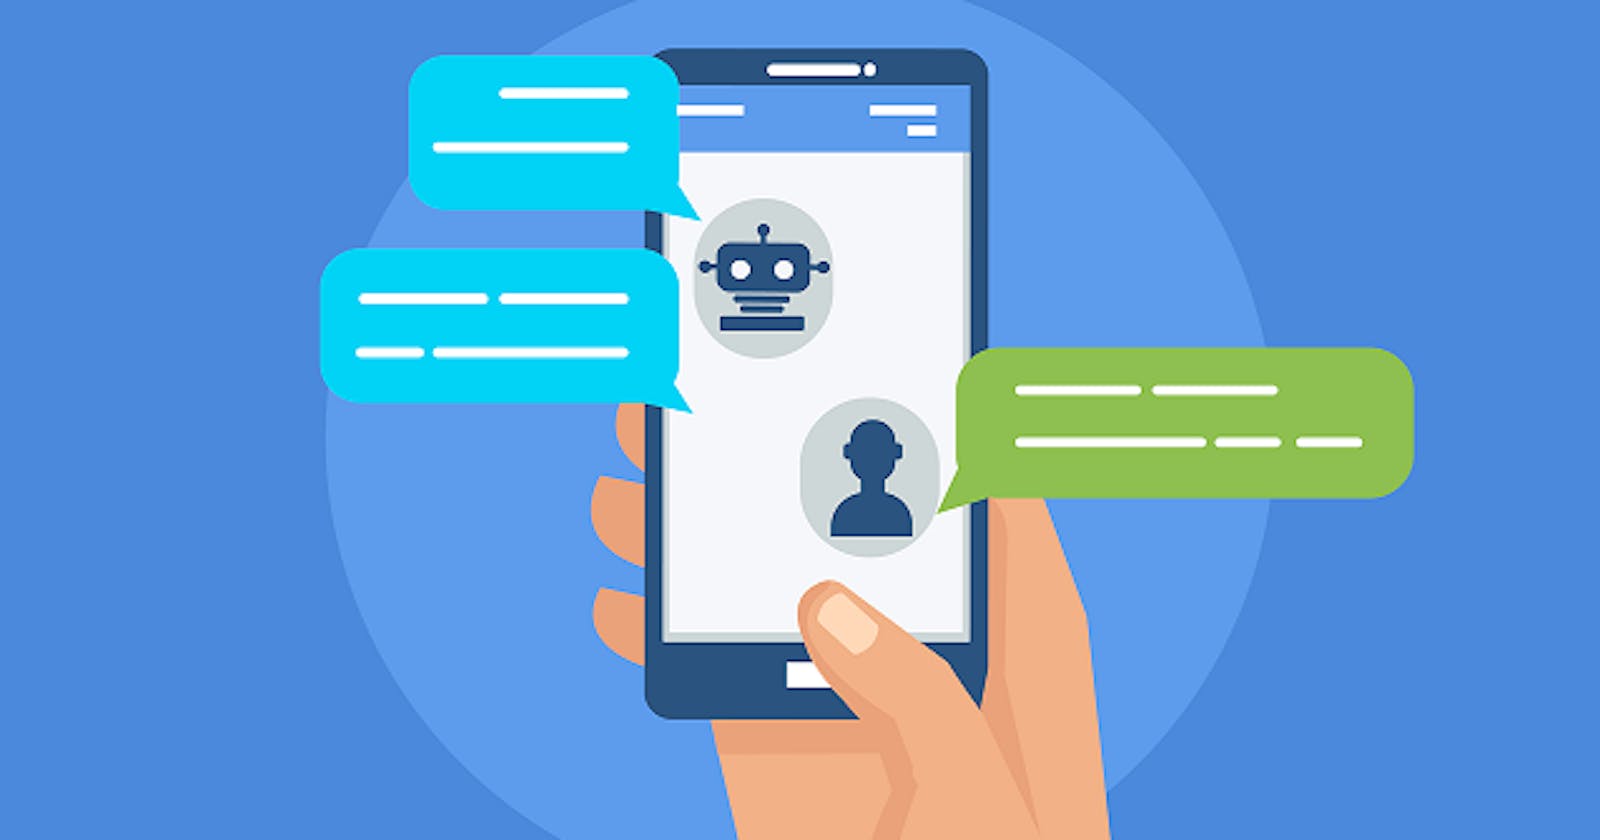 Understand How Chatbots Can Take Your Business To The Next Level